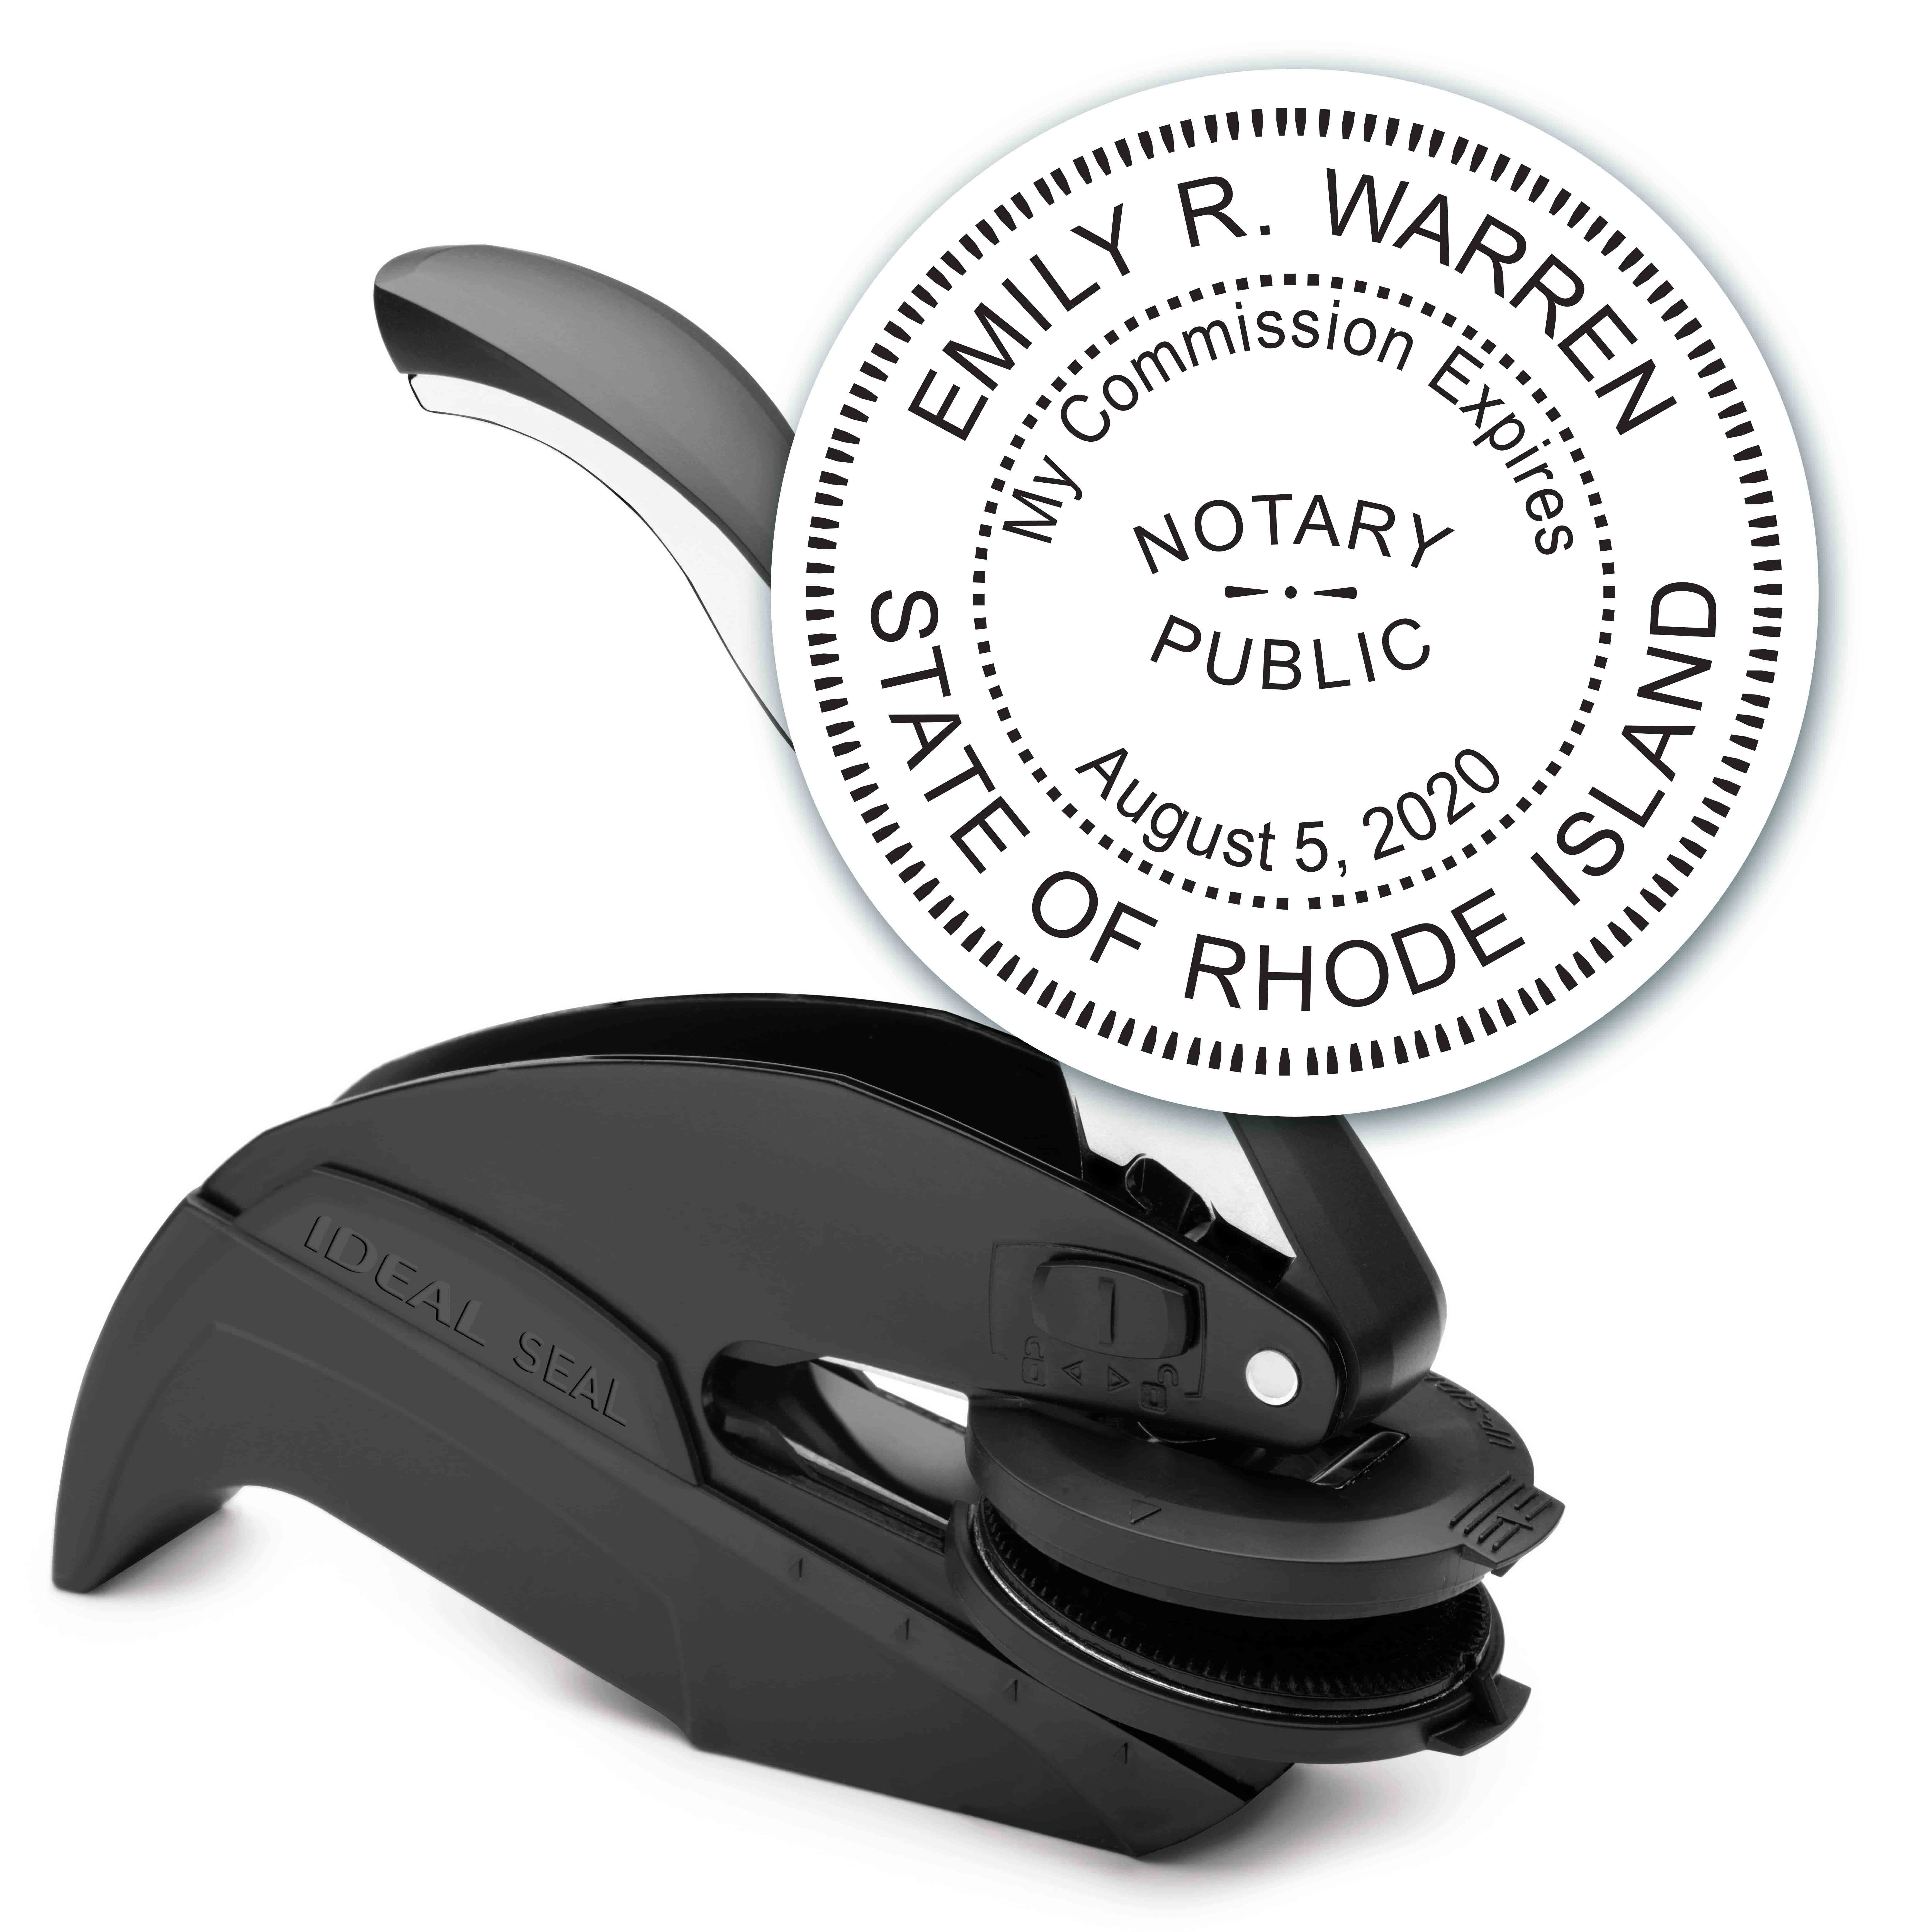 Notary Seal Round Embosser for Rhode Island State - Includes Gold Burst Seal Labels (42 count)	